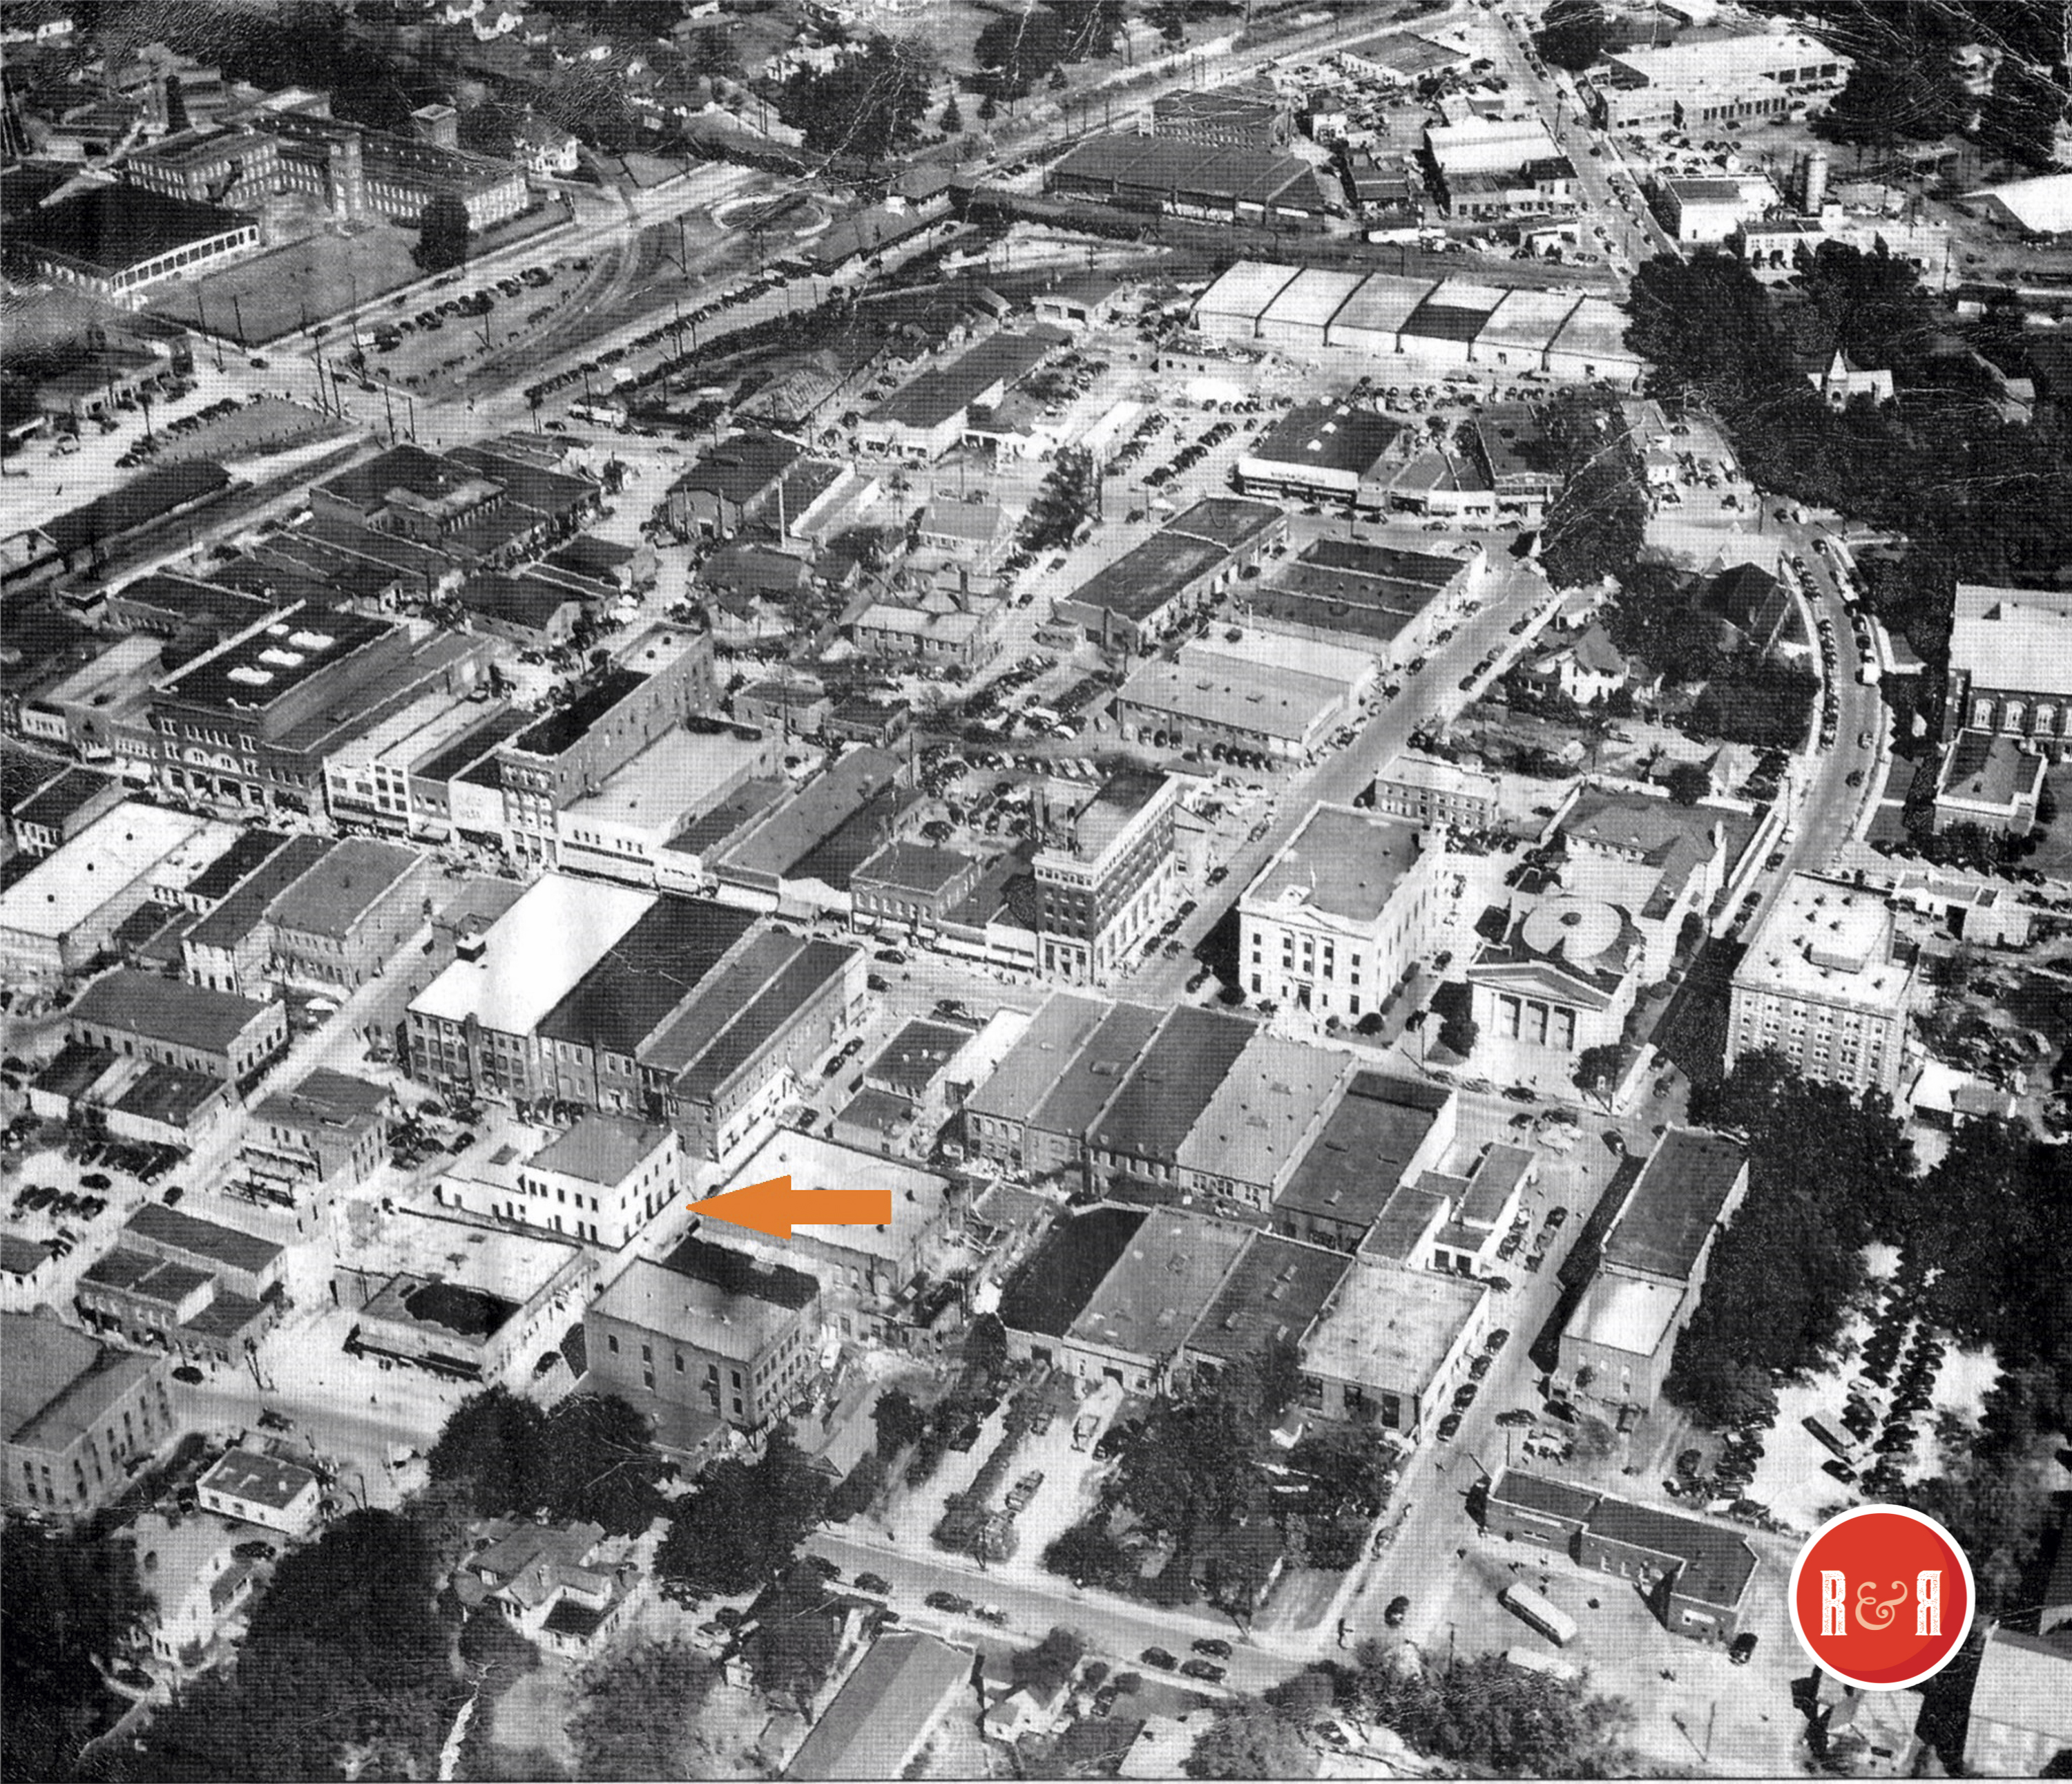 AERIAL OF THE LOCATION OF THE OLD CITY HALL